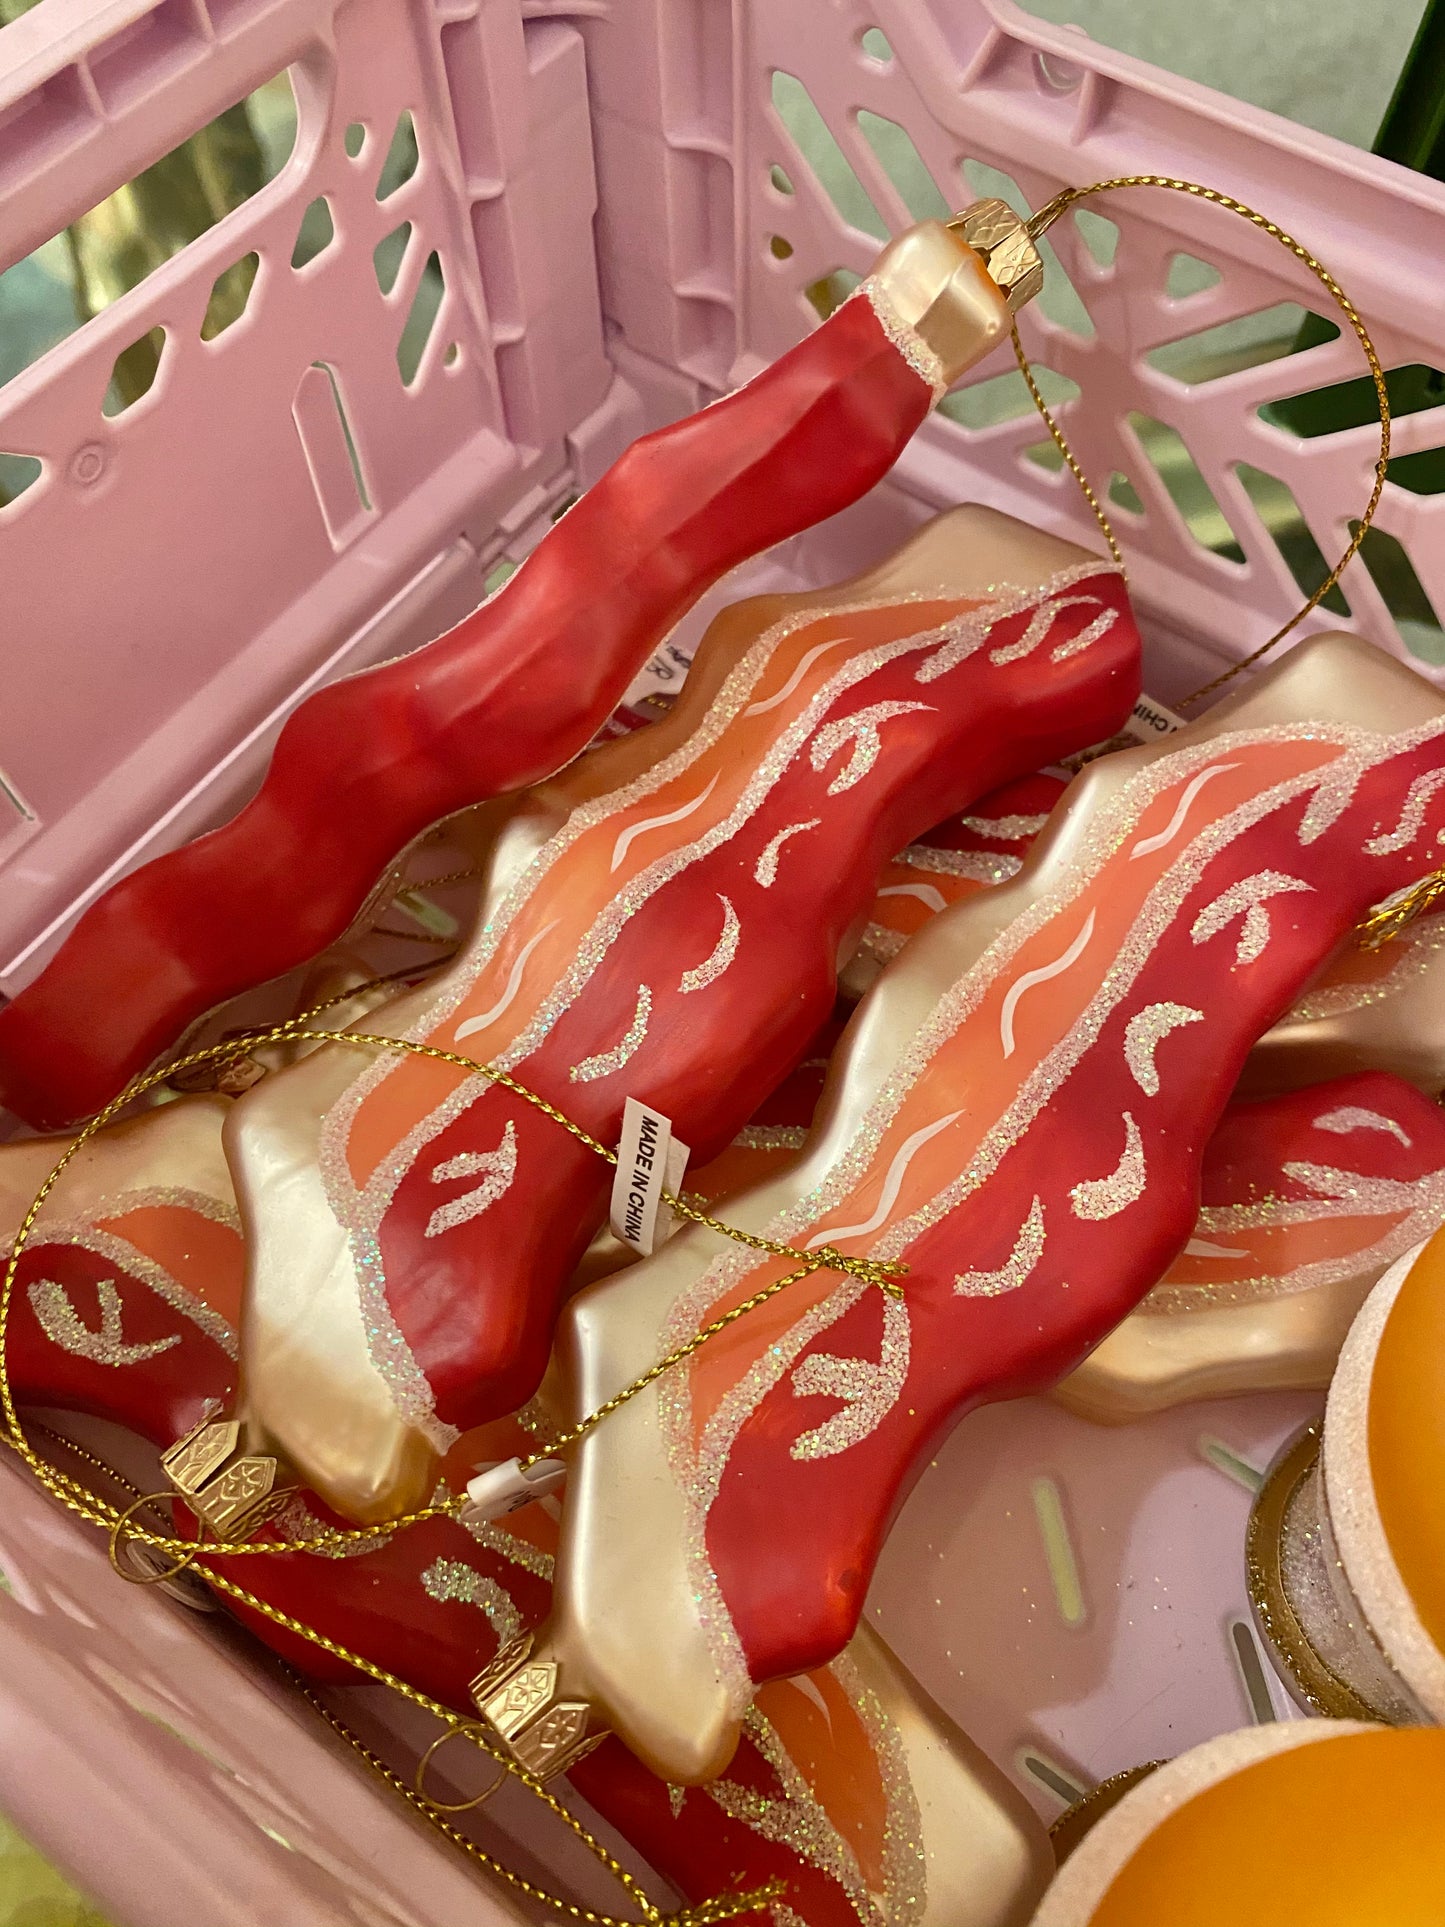 Strip of Bacon Holiday ornament